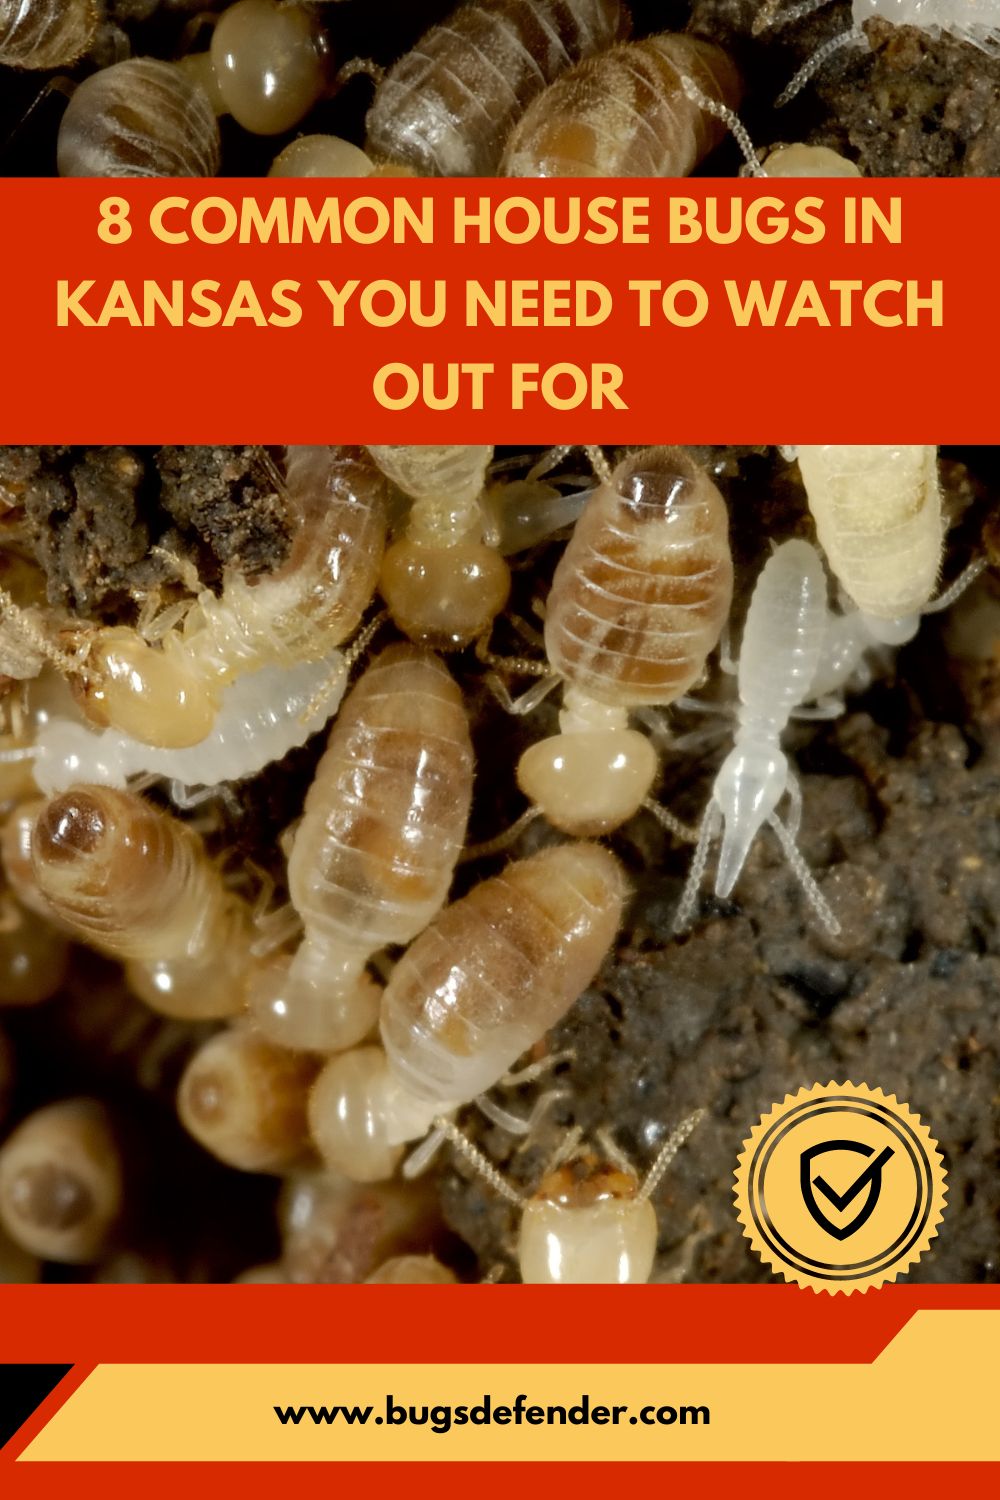 8 Common House Bugs In Kansas You Need To Watch Out For pin1